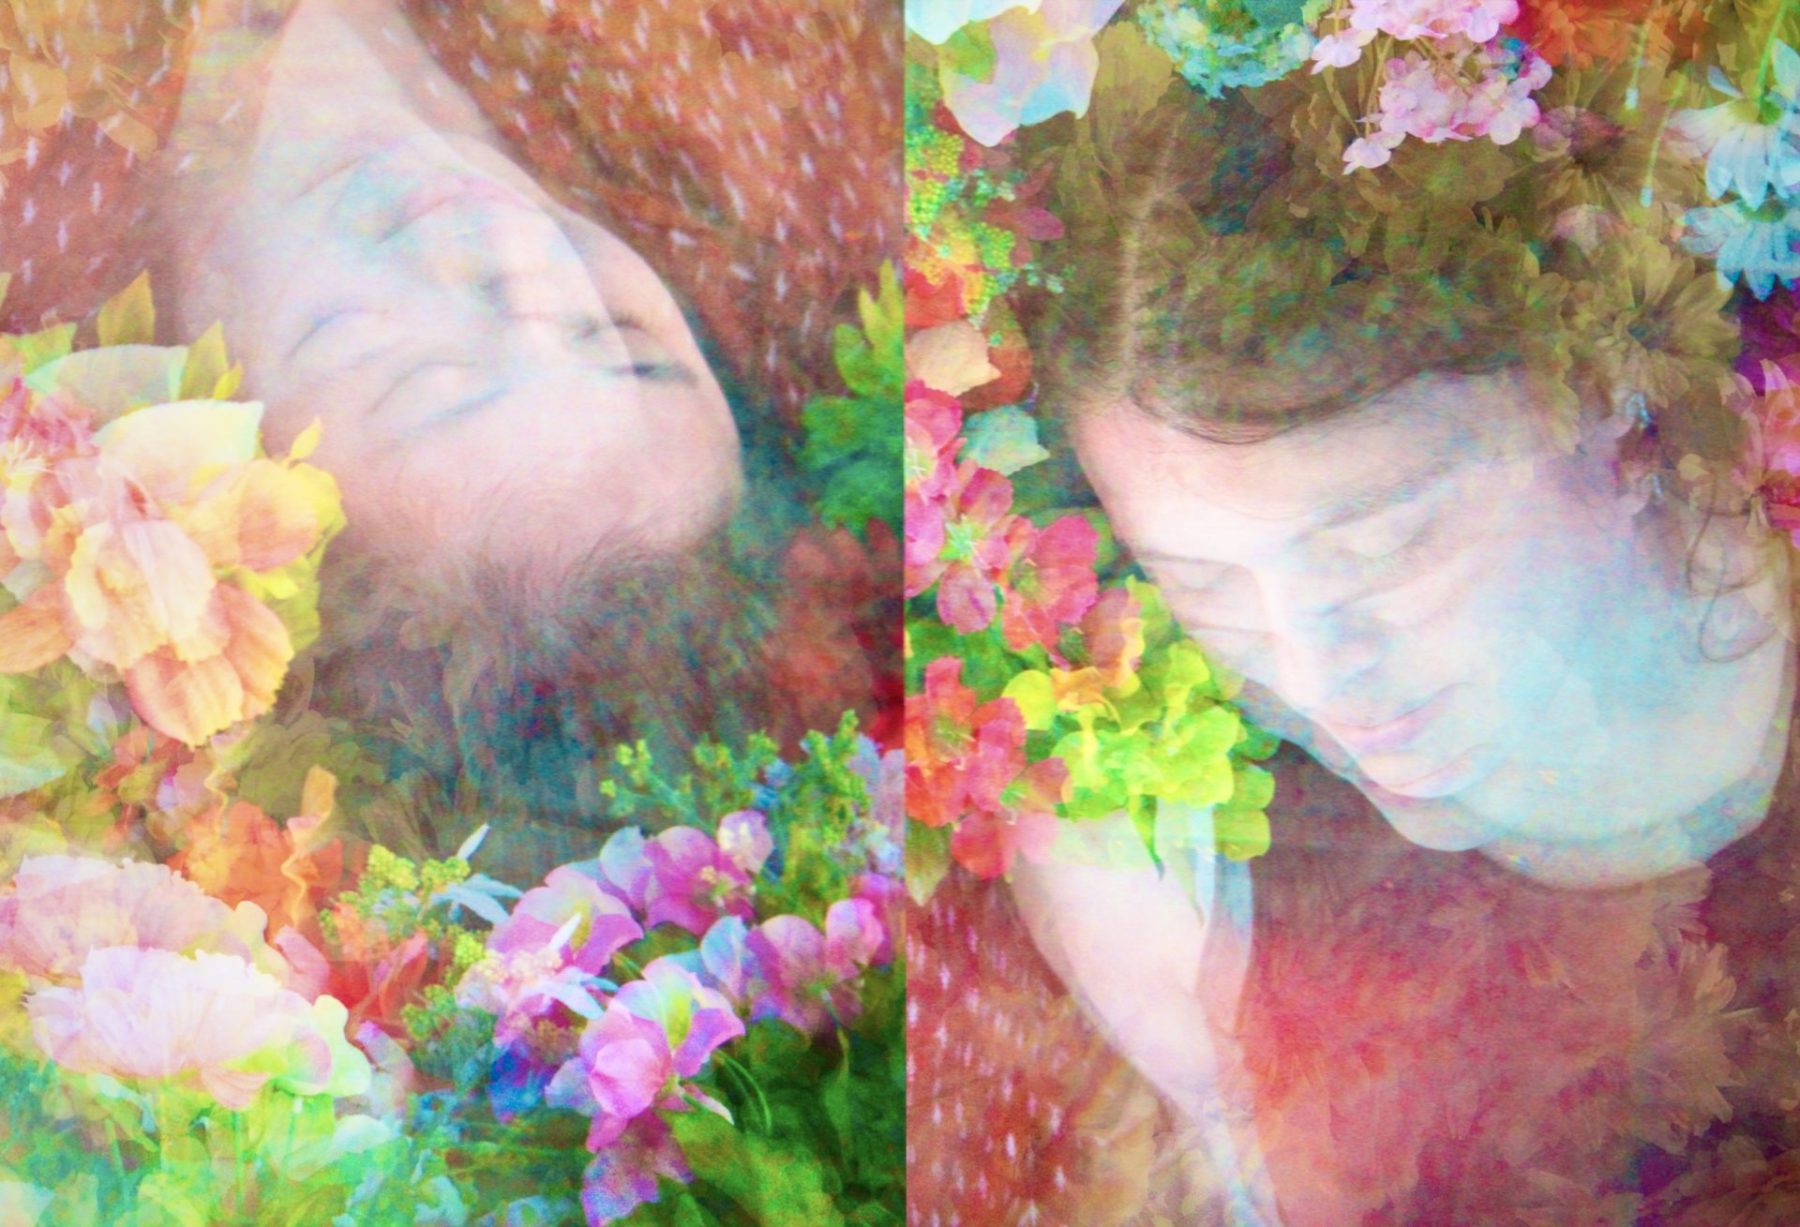 Aysha Dulong and Cindy Kao surrounded by flowers with a filter on the image